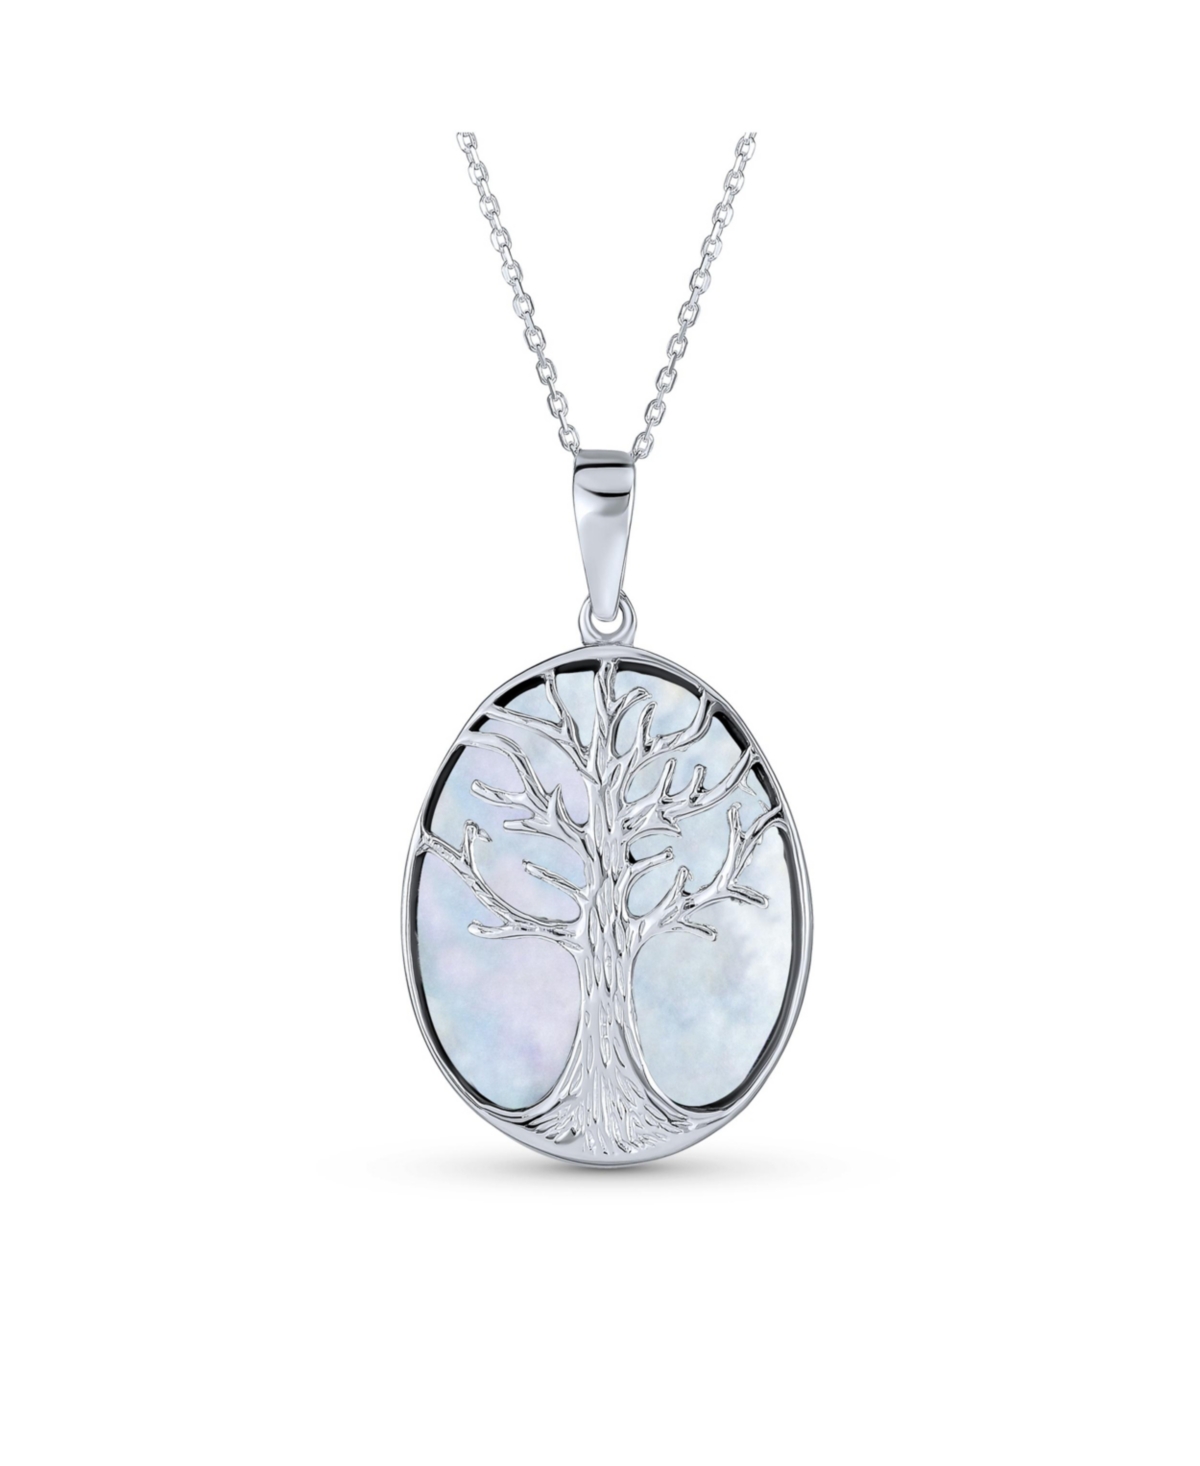 Celtic White Rainbow Mother Of Pearl Shell Oval Family Tree Of Life Pendant Necklace Western Jewelry For Women .925 Sterling Silver - Wh